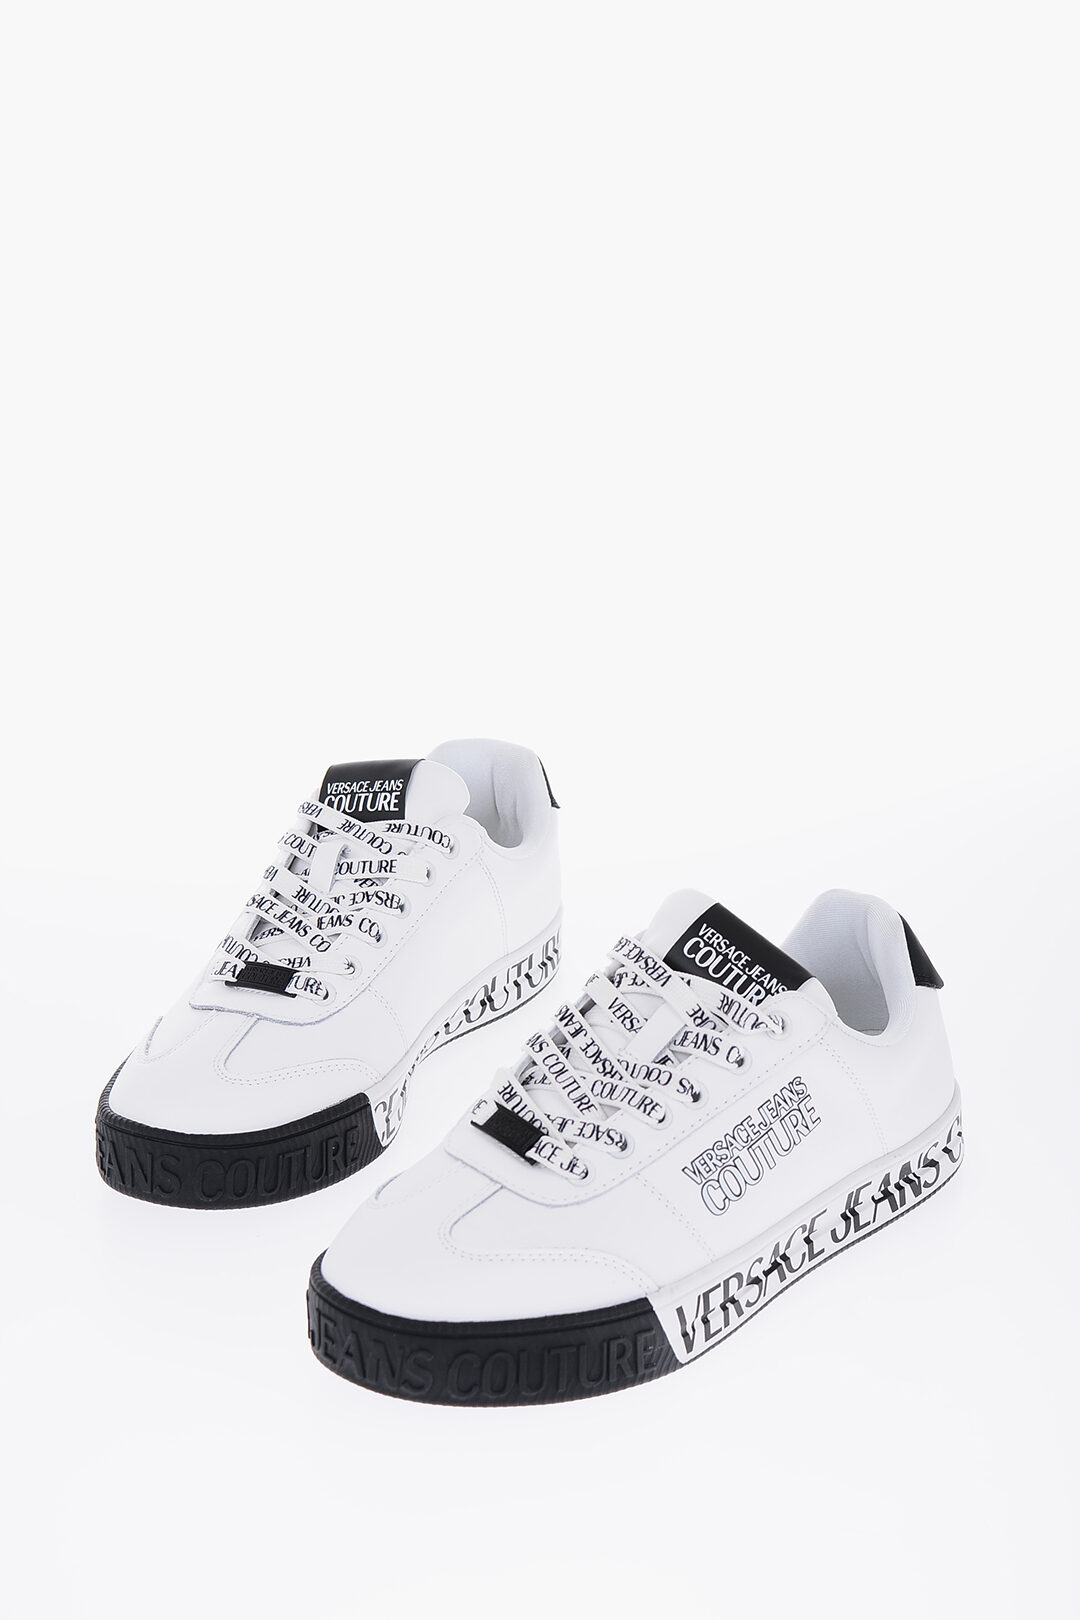 Versace JEANS Leather COURT 88 Sneakers with Logoed Strings men Glamood